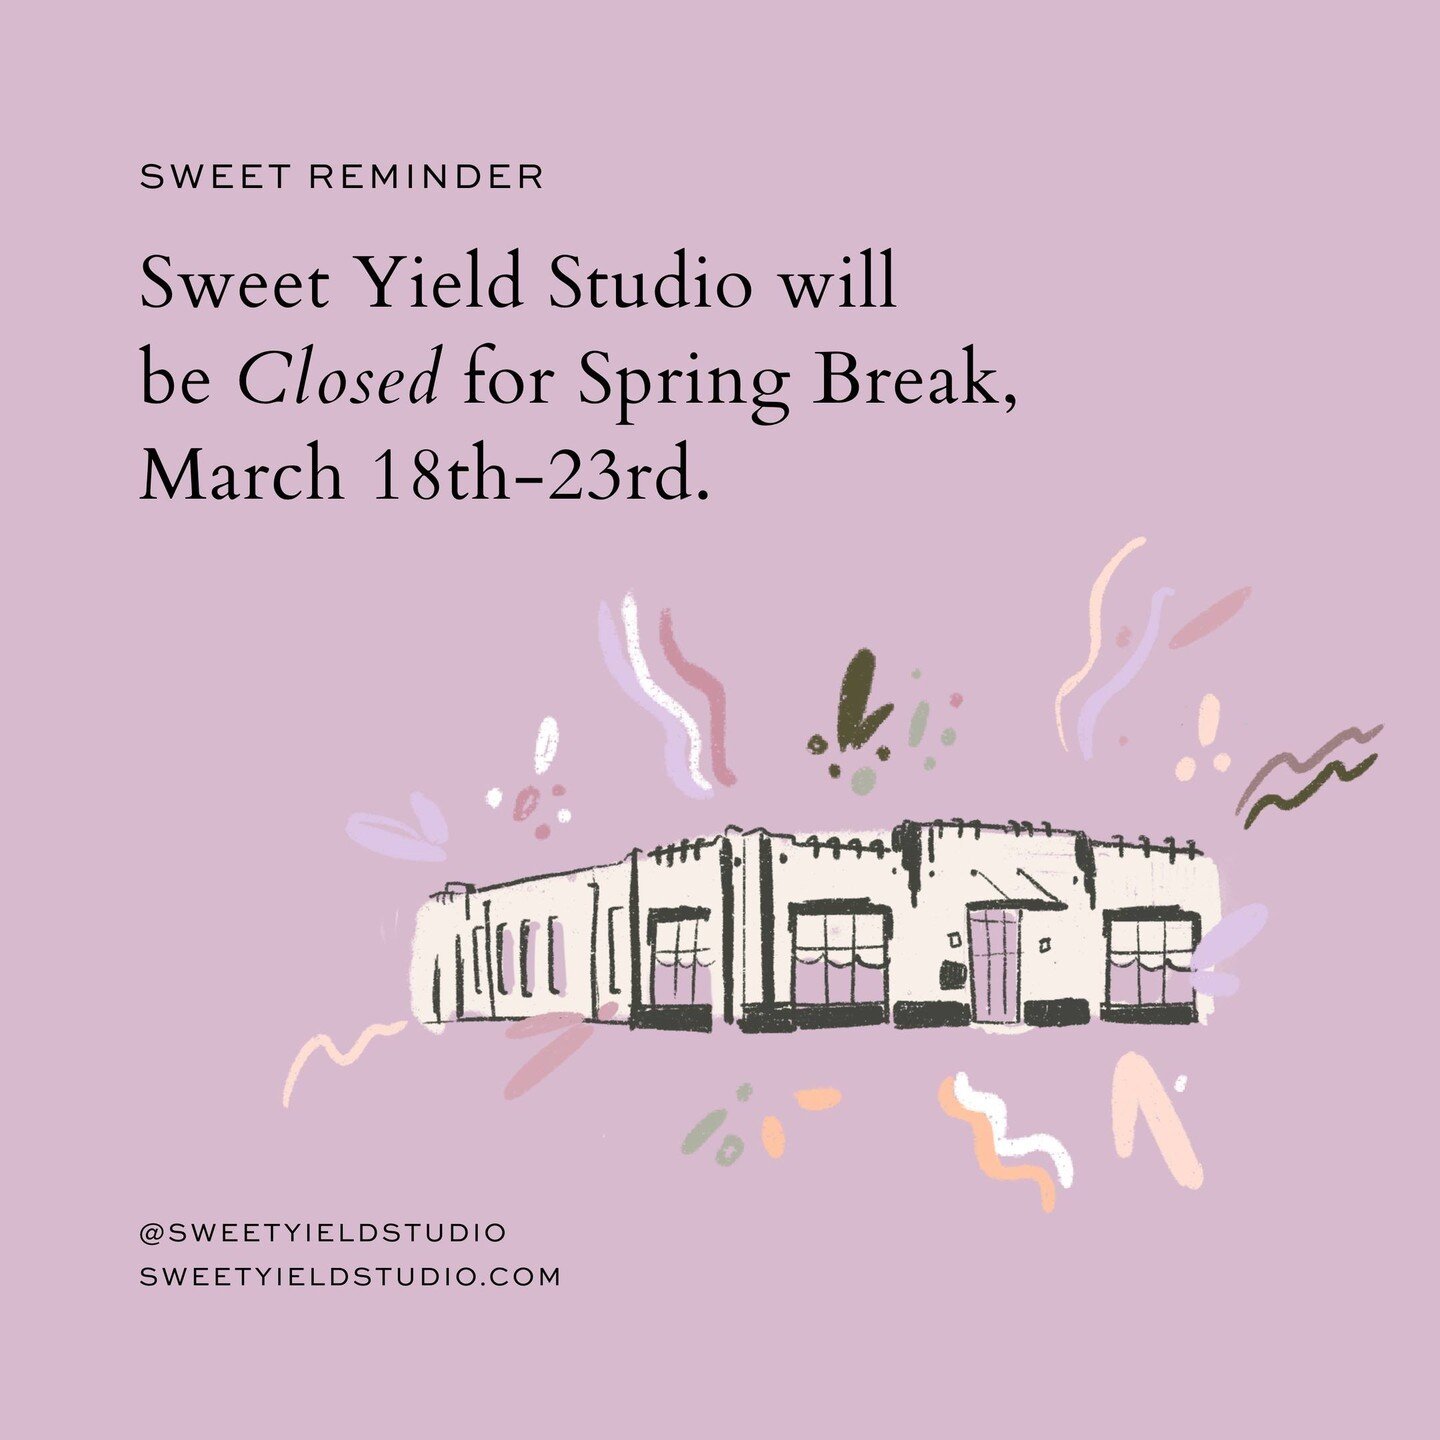 Sweet Reminder: The studio is closed this week for Spring Break. All classes resume Monday, March 25th.